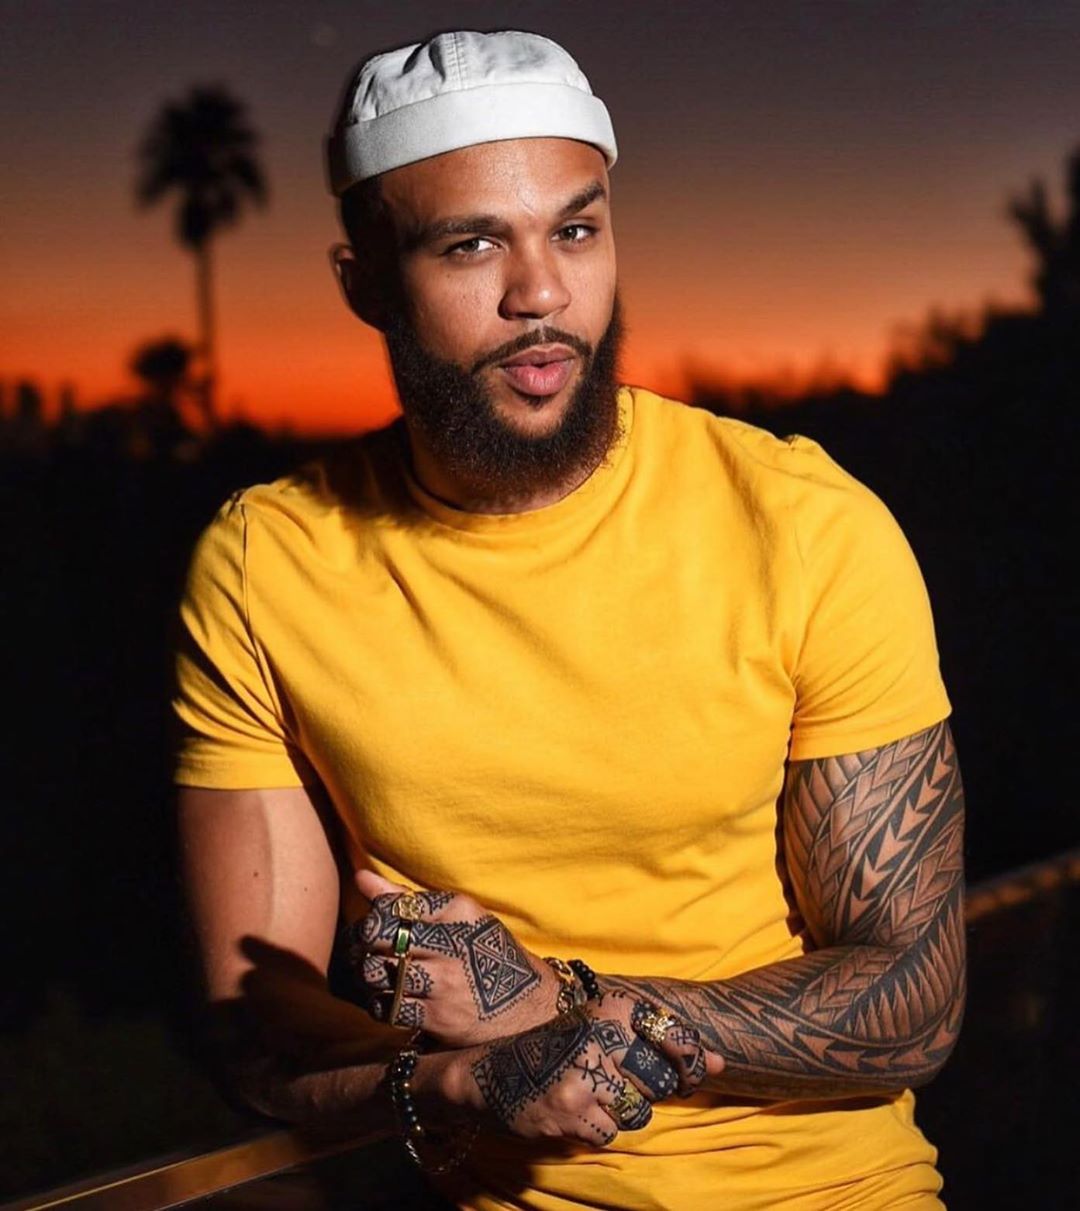  Jidenna is a Nigerian-American rapper, singer, songwriter, and record producer. [Instagram/Jidenna]